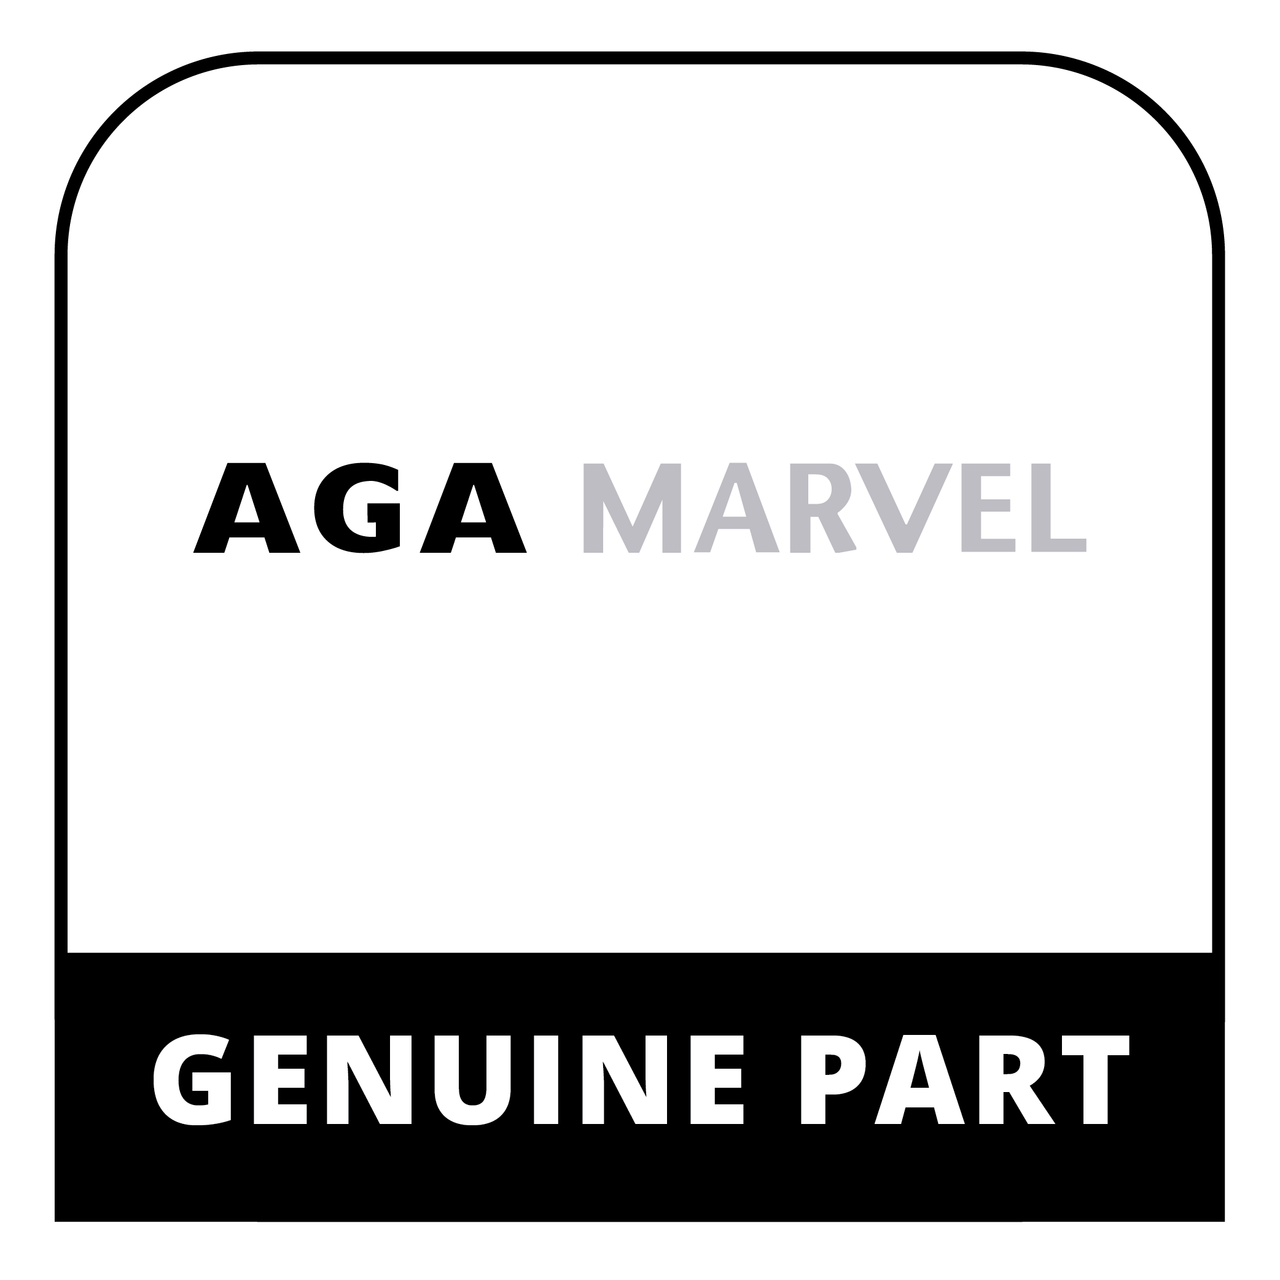 AGA Marvel R3818 - Rope 25Mm Diax240Mm Taped Ends - Genuine AGA Marvel Part